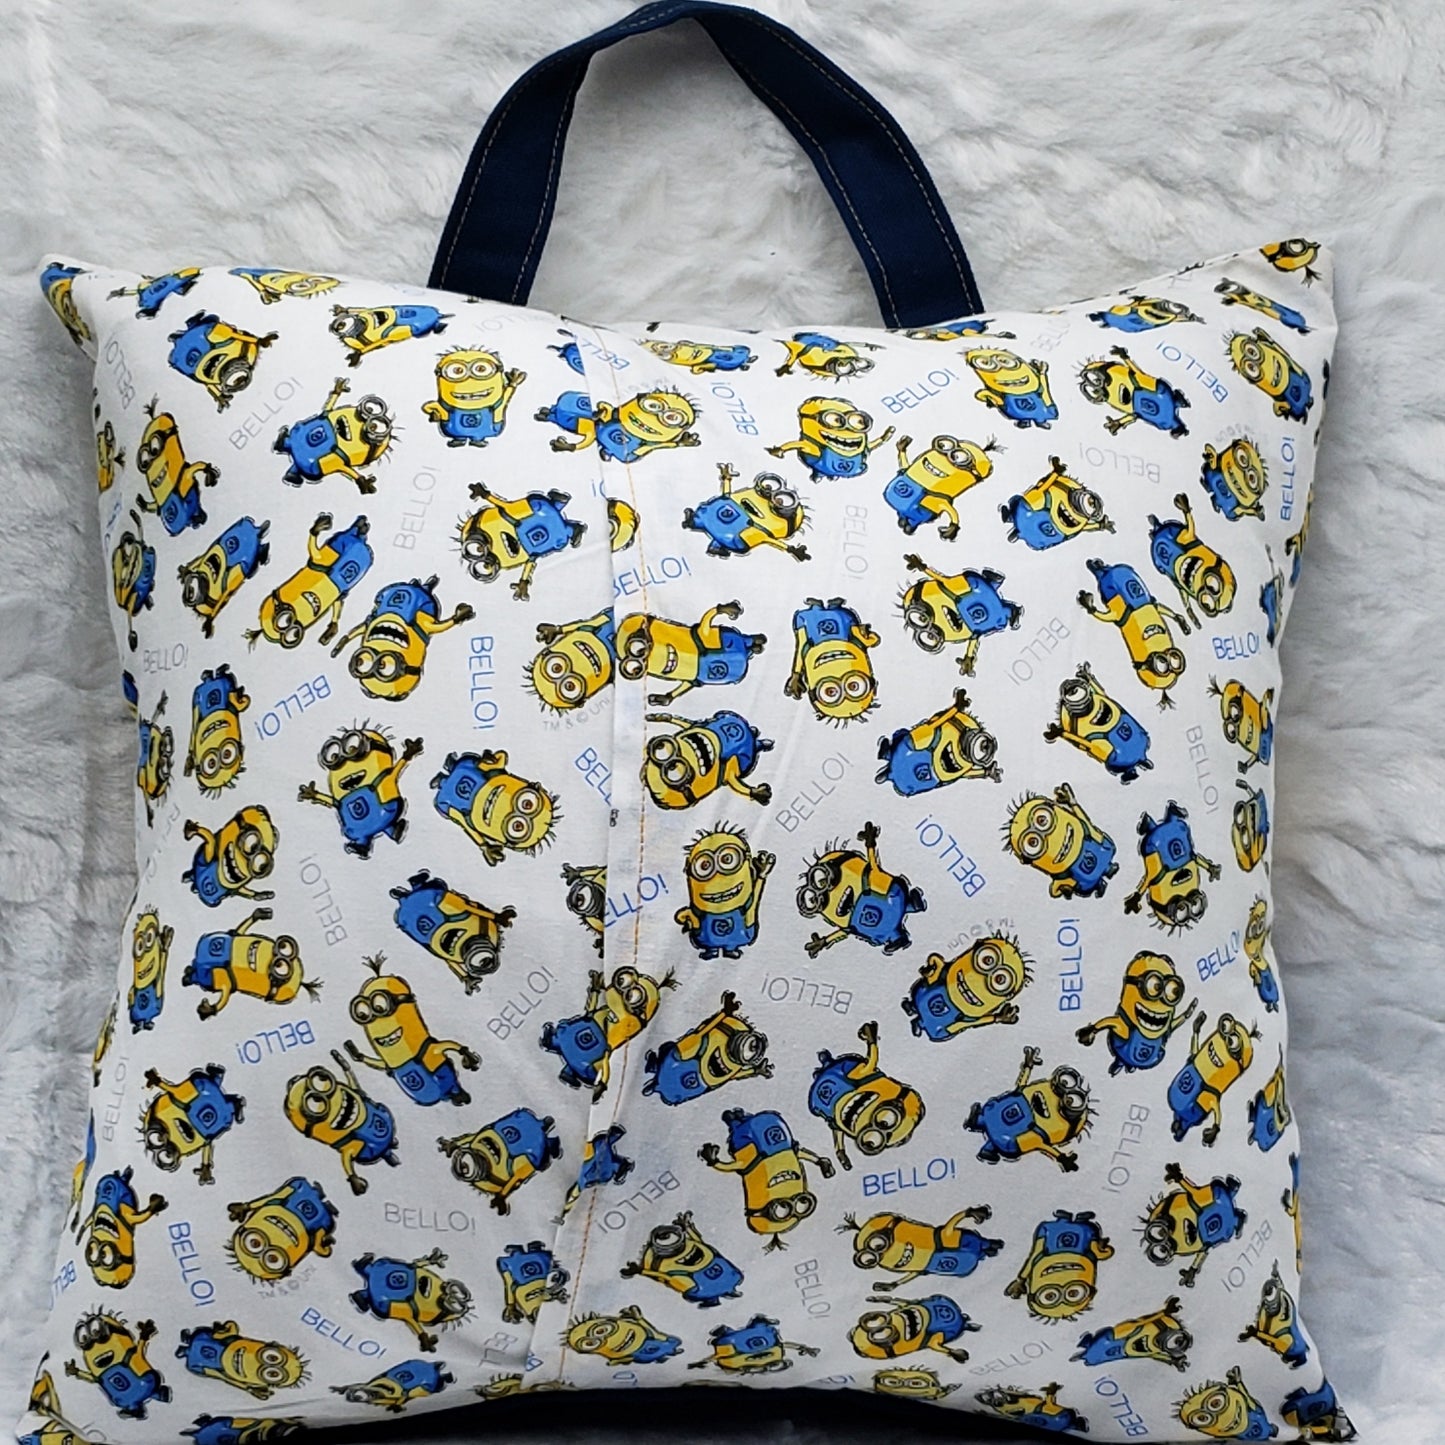 Minion Reasons To Love Reading Reading Pillow Cover